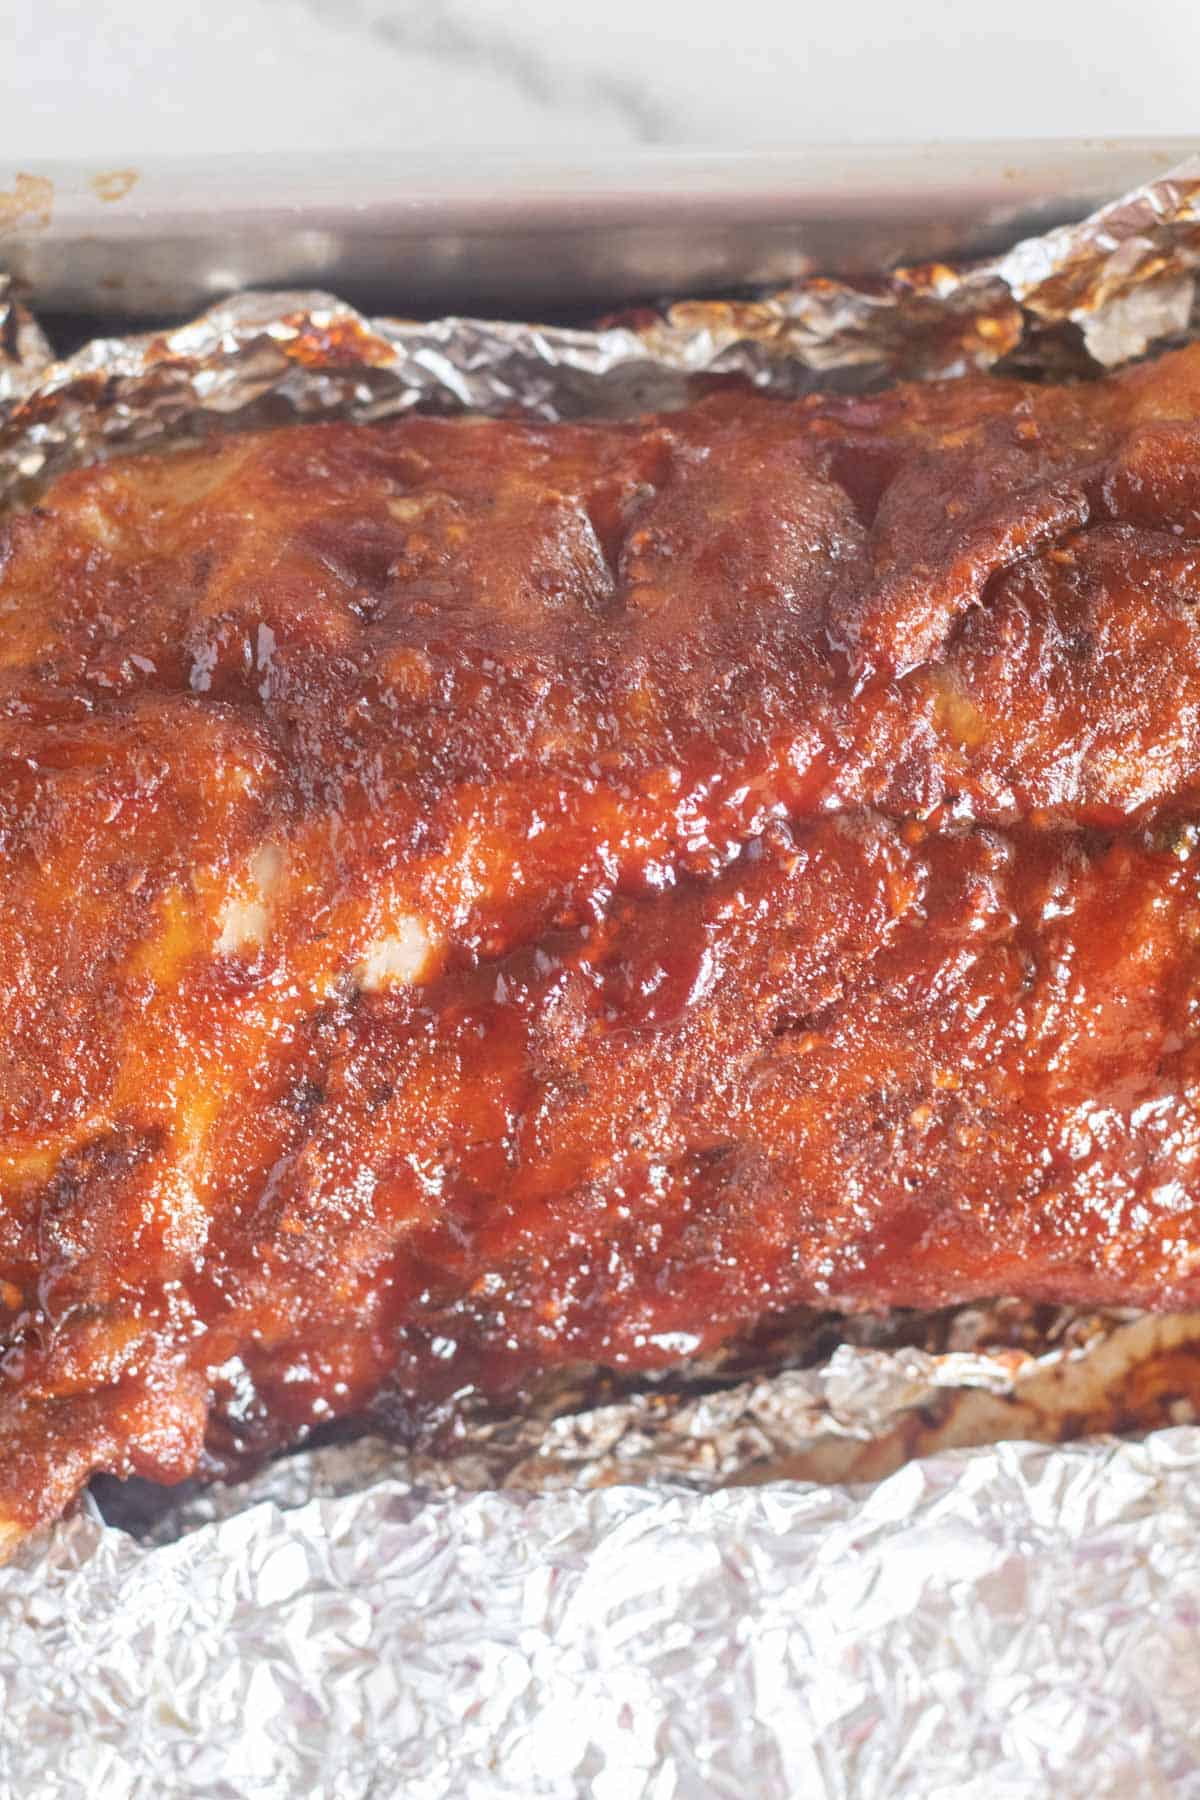 finished ribs with bbq sauce on foil-lined baking sheet